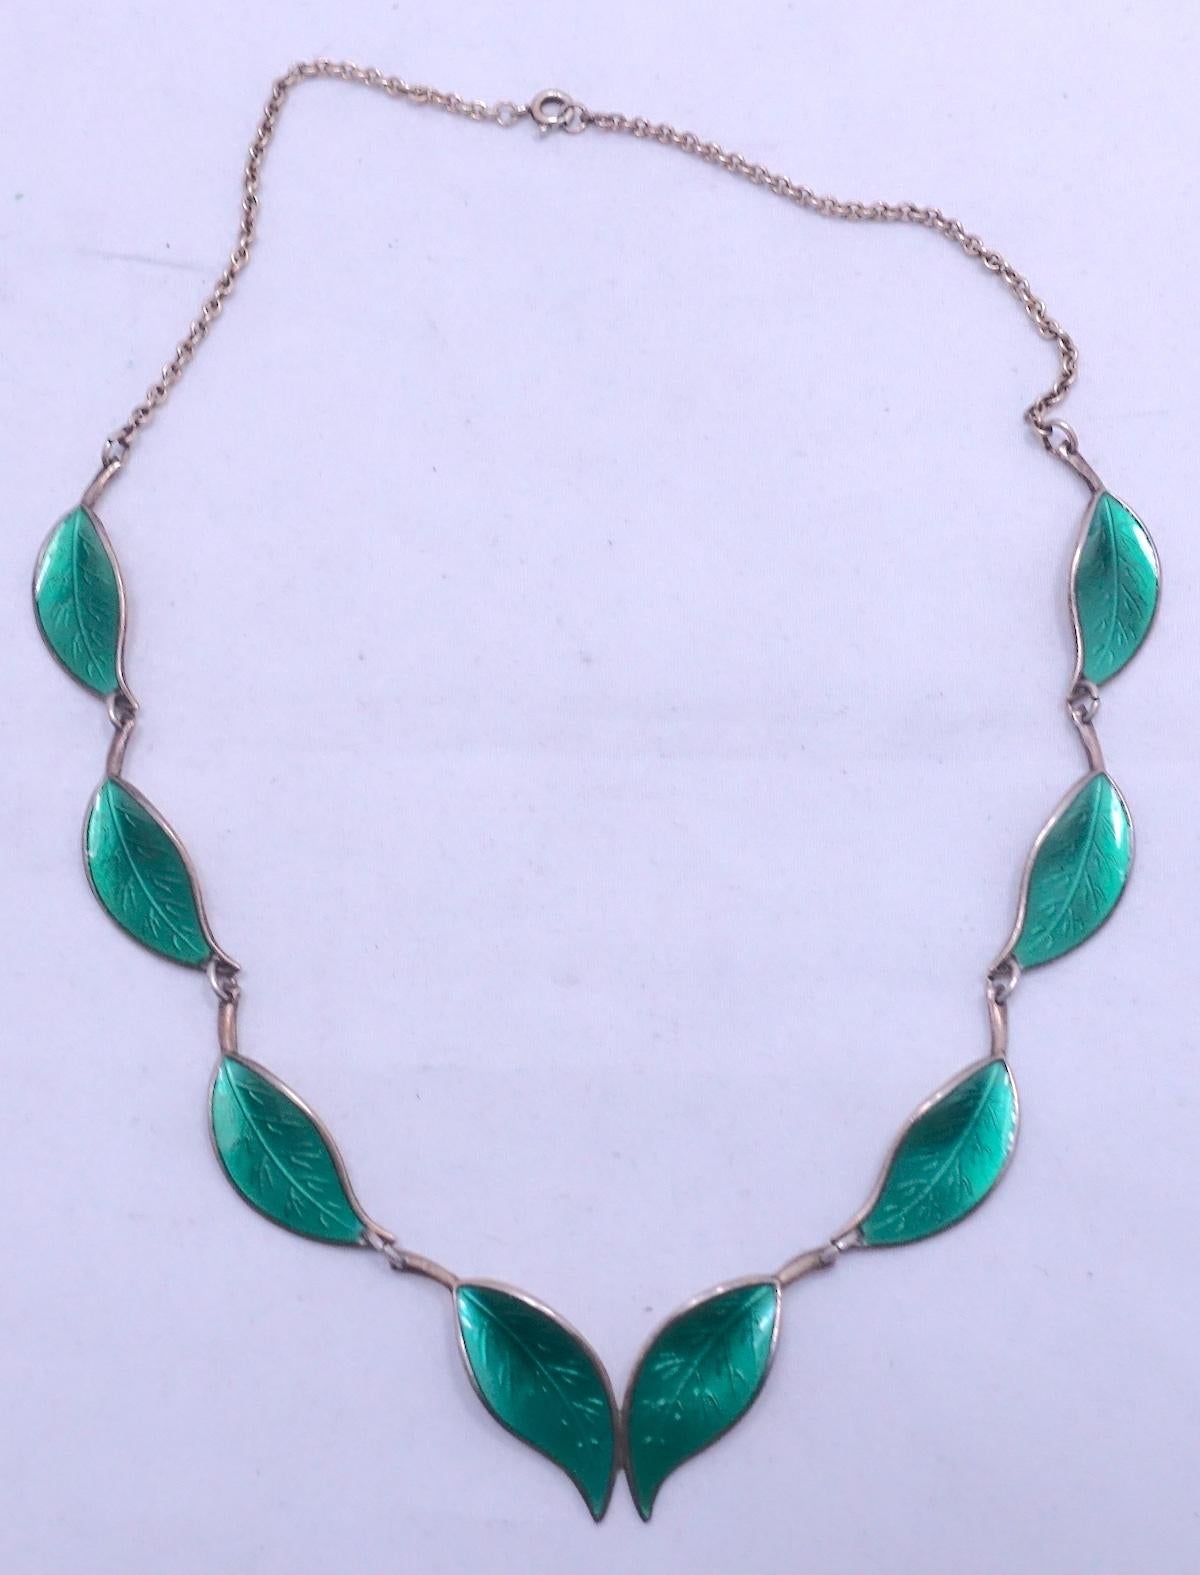 This vintage signed David Andersen necklace features green enameling on a sterling silver/gold wash setting.  In excellent condition, this necklace measures 16” x 1/2” with a spring closure and is signed “D-A 9258 Sterling Norway”.